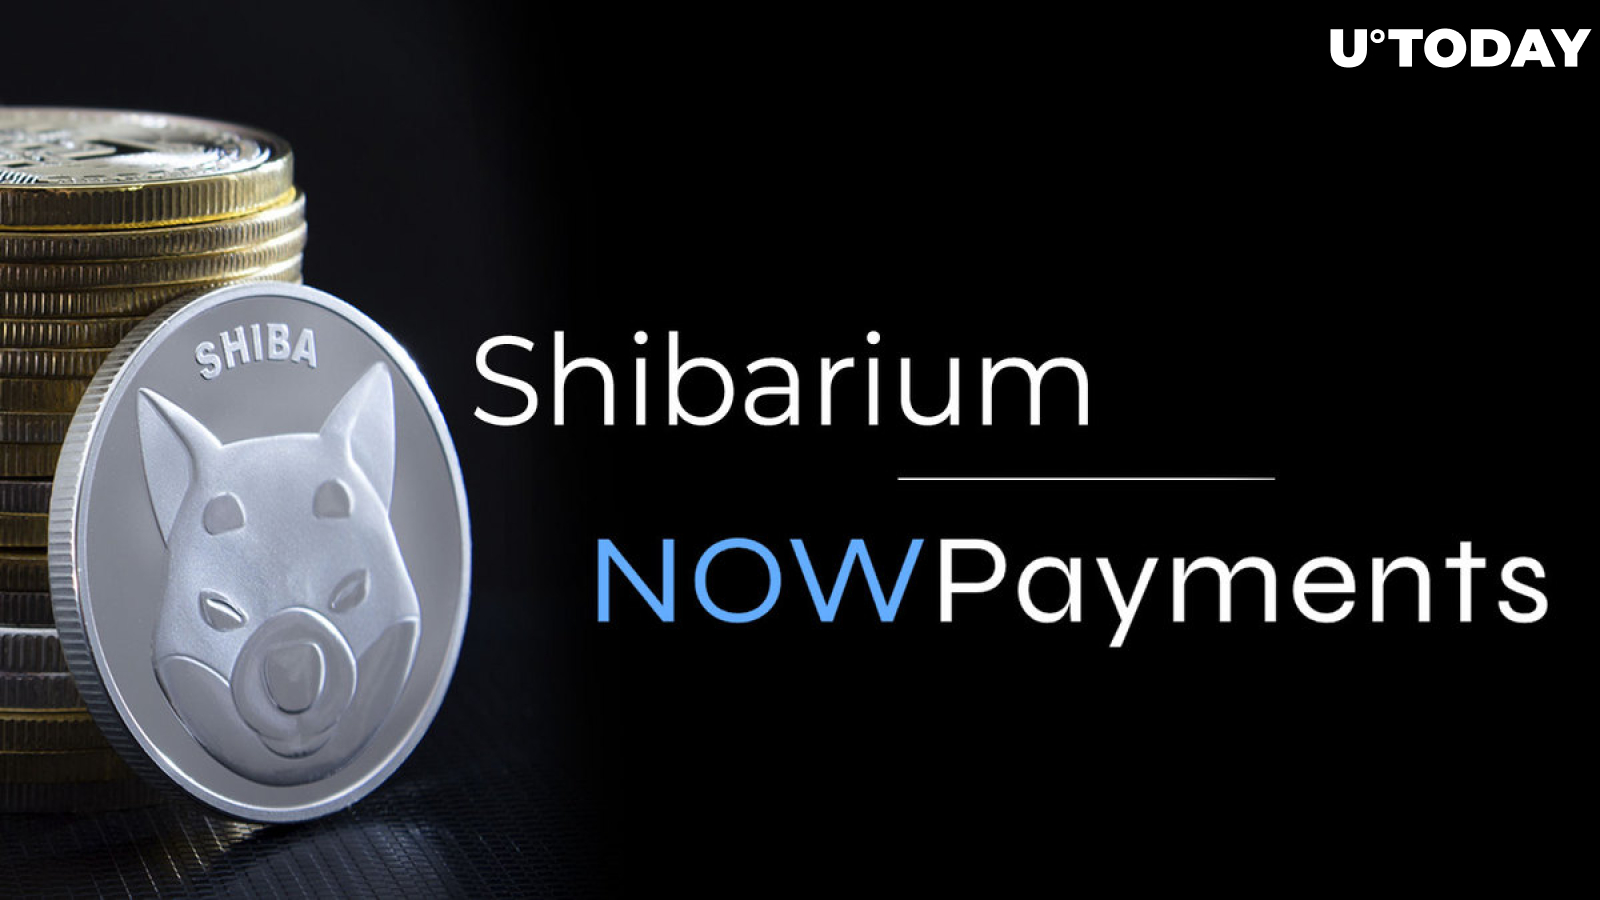 Shibarium and NOWPayments Join Forces: Shiba Inu (SHIB) Lead Approves